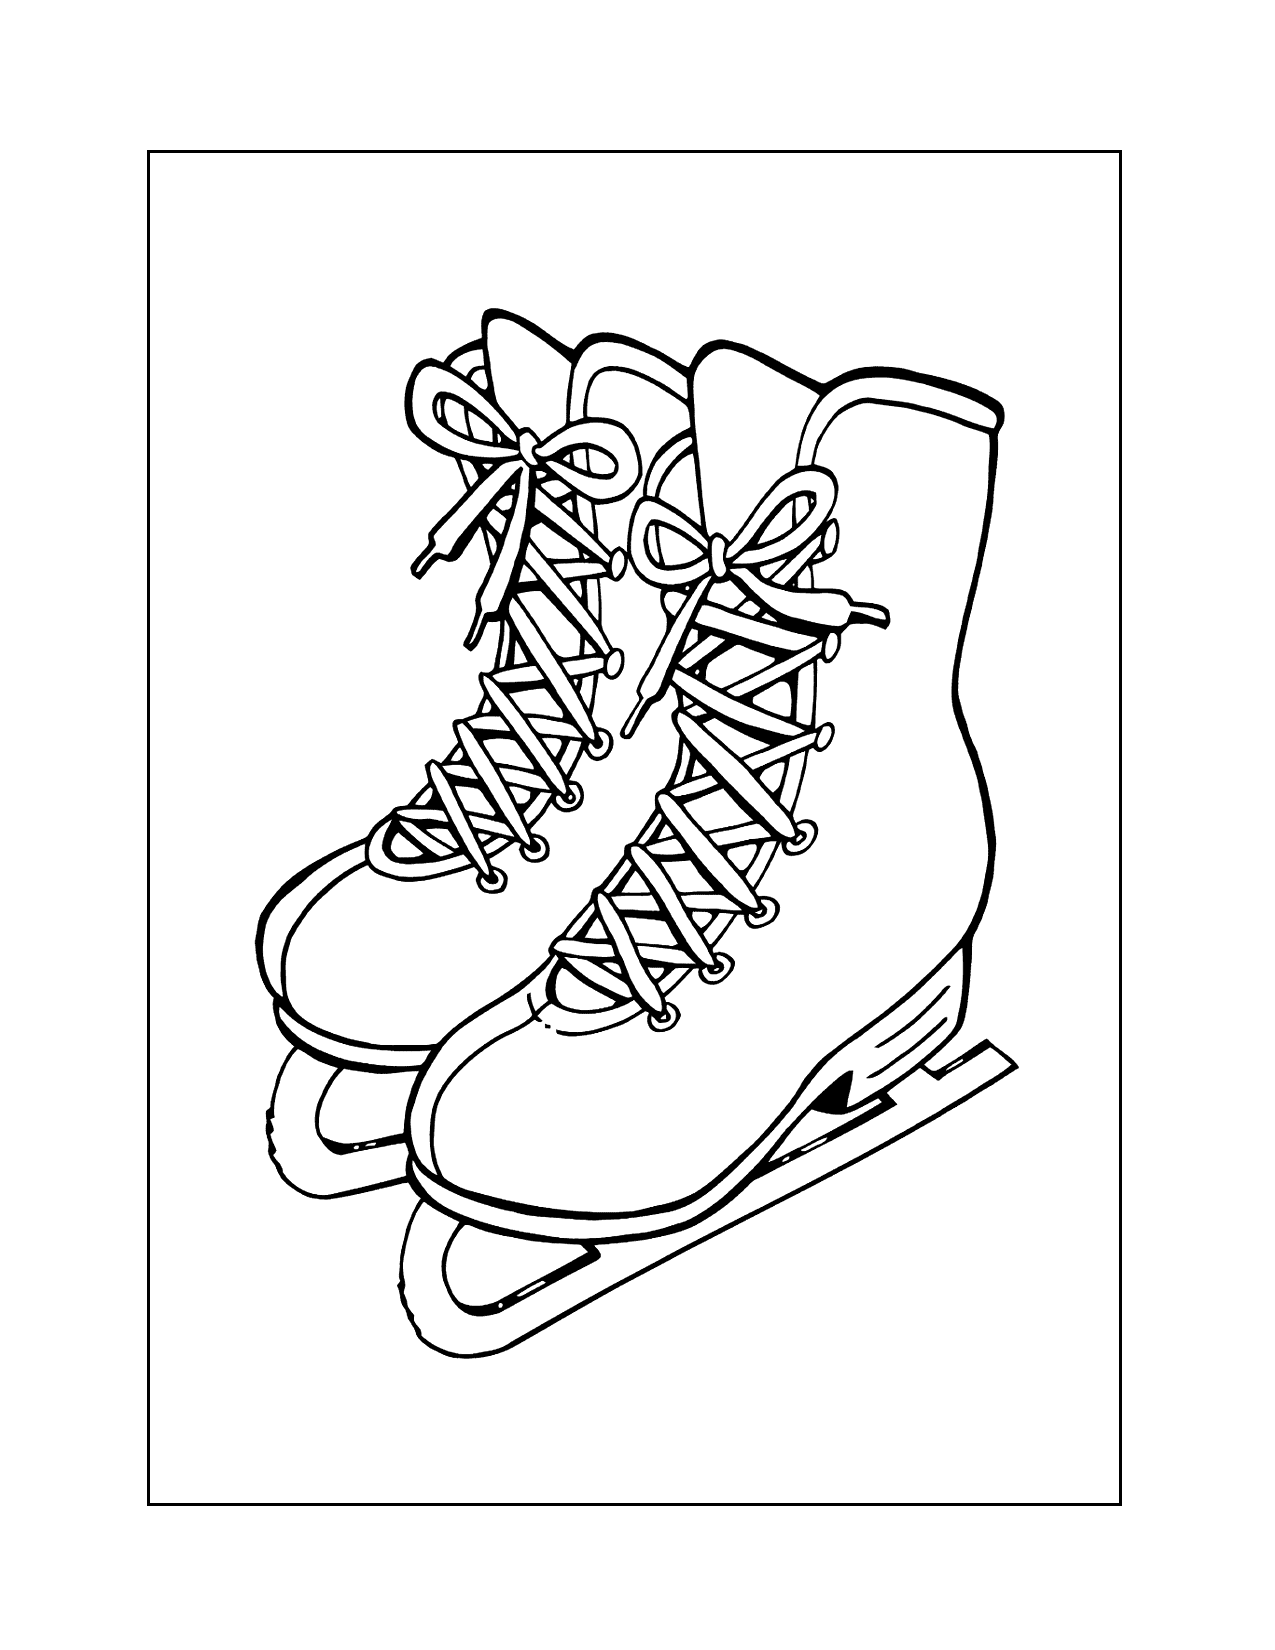 Pair Of Ice Skates Coloring Page